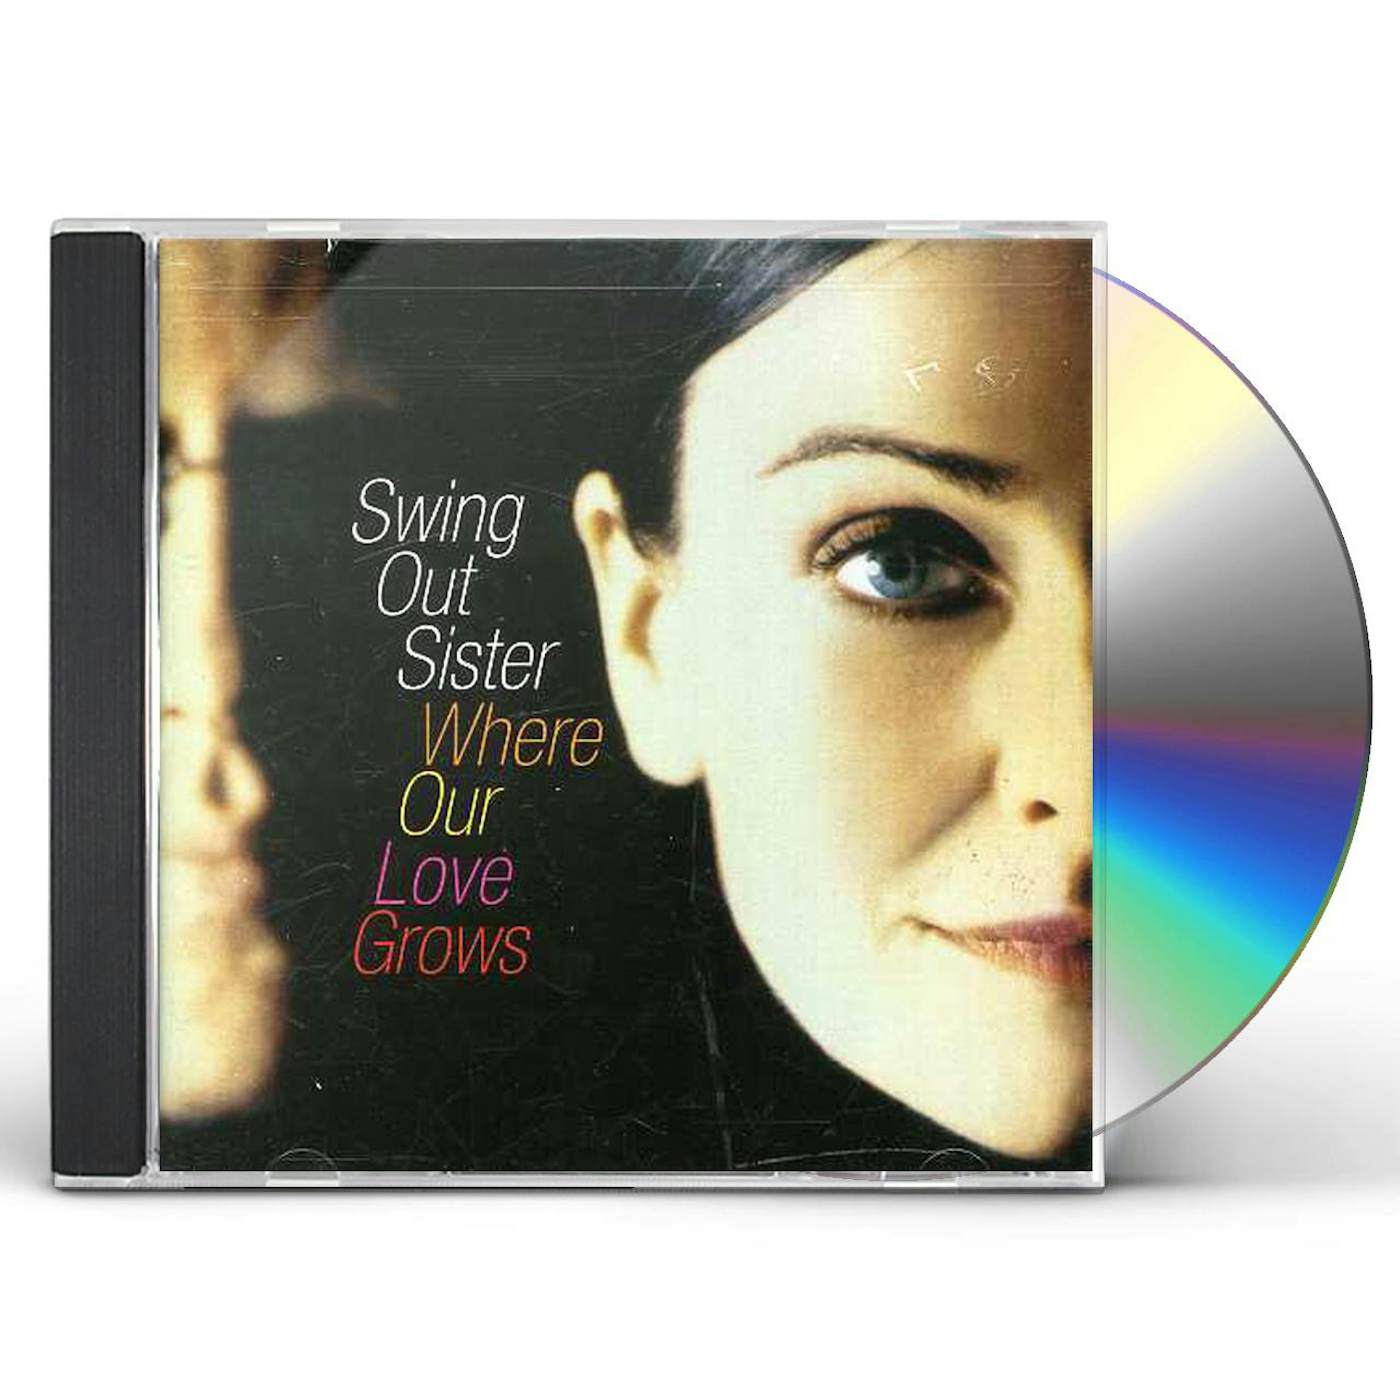 Swing Out Sister WHERE OUR LOVE GROWS CD